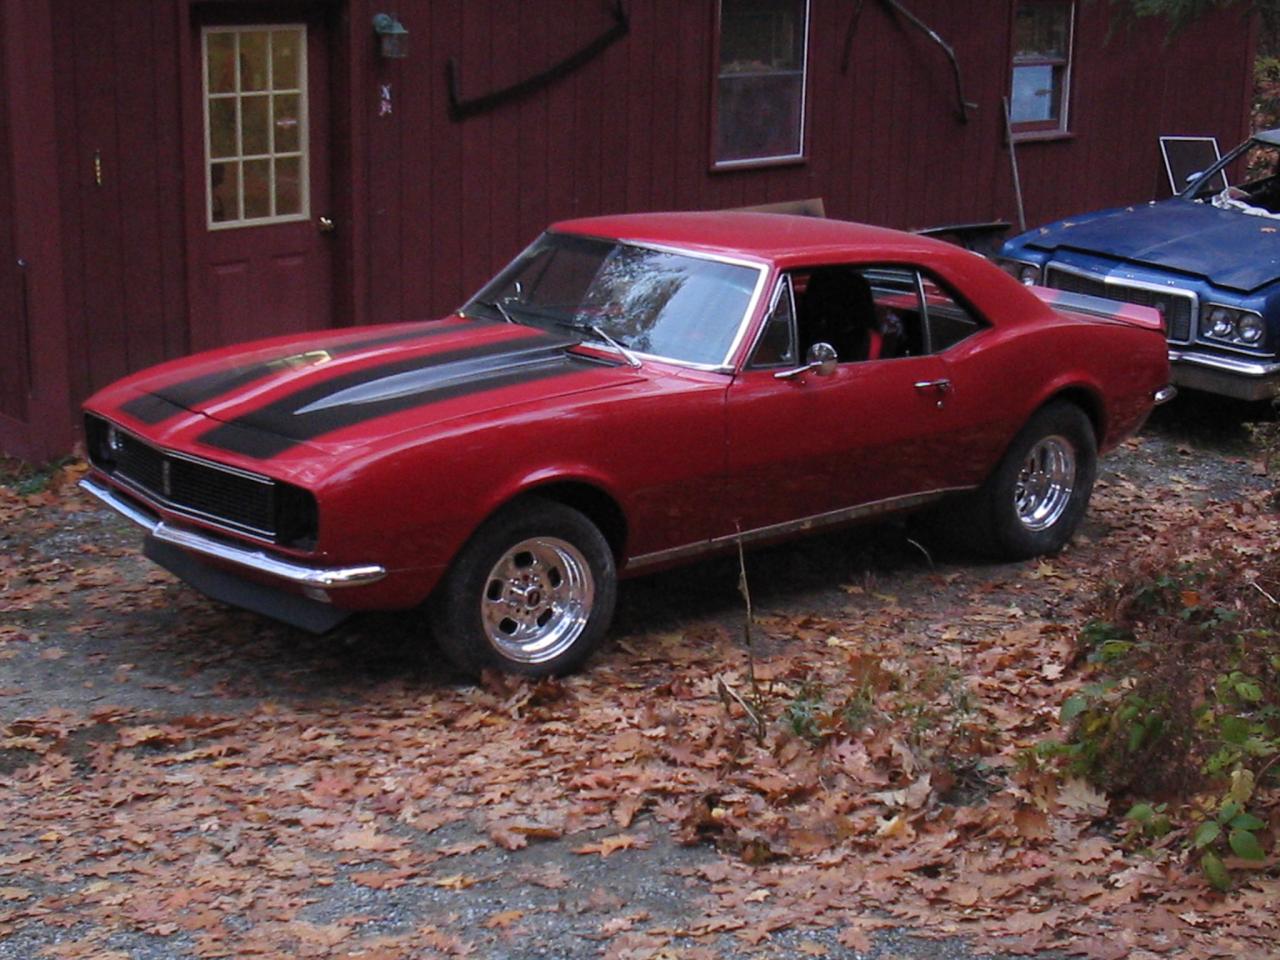 '67 Camaro RS pro street hot rod,yes it was a great condition all original car,and no I dont need any one else to tellme I ruined it.